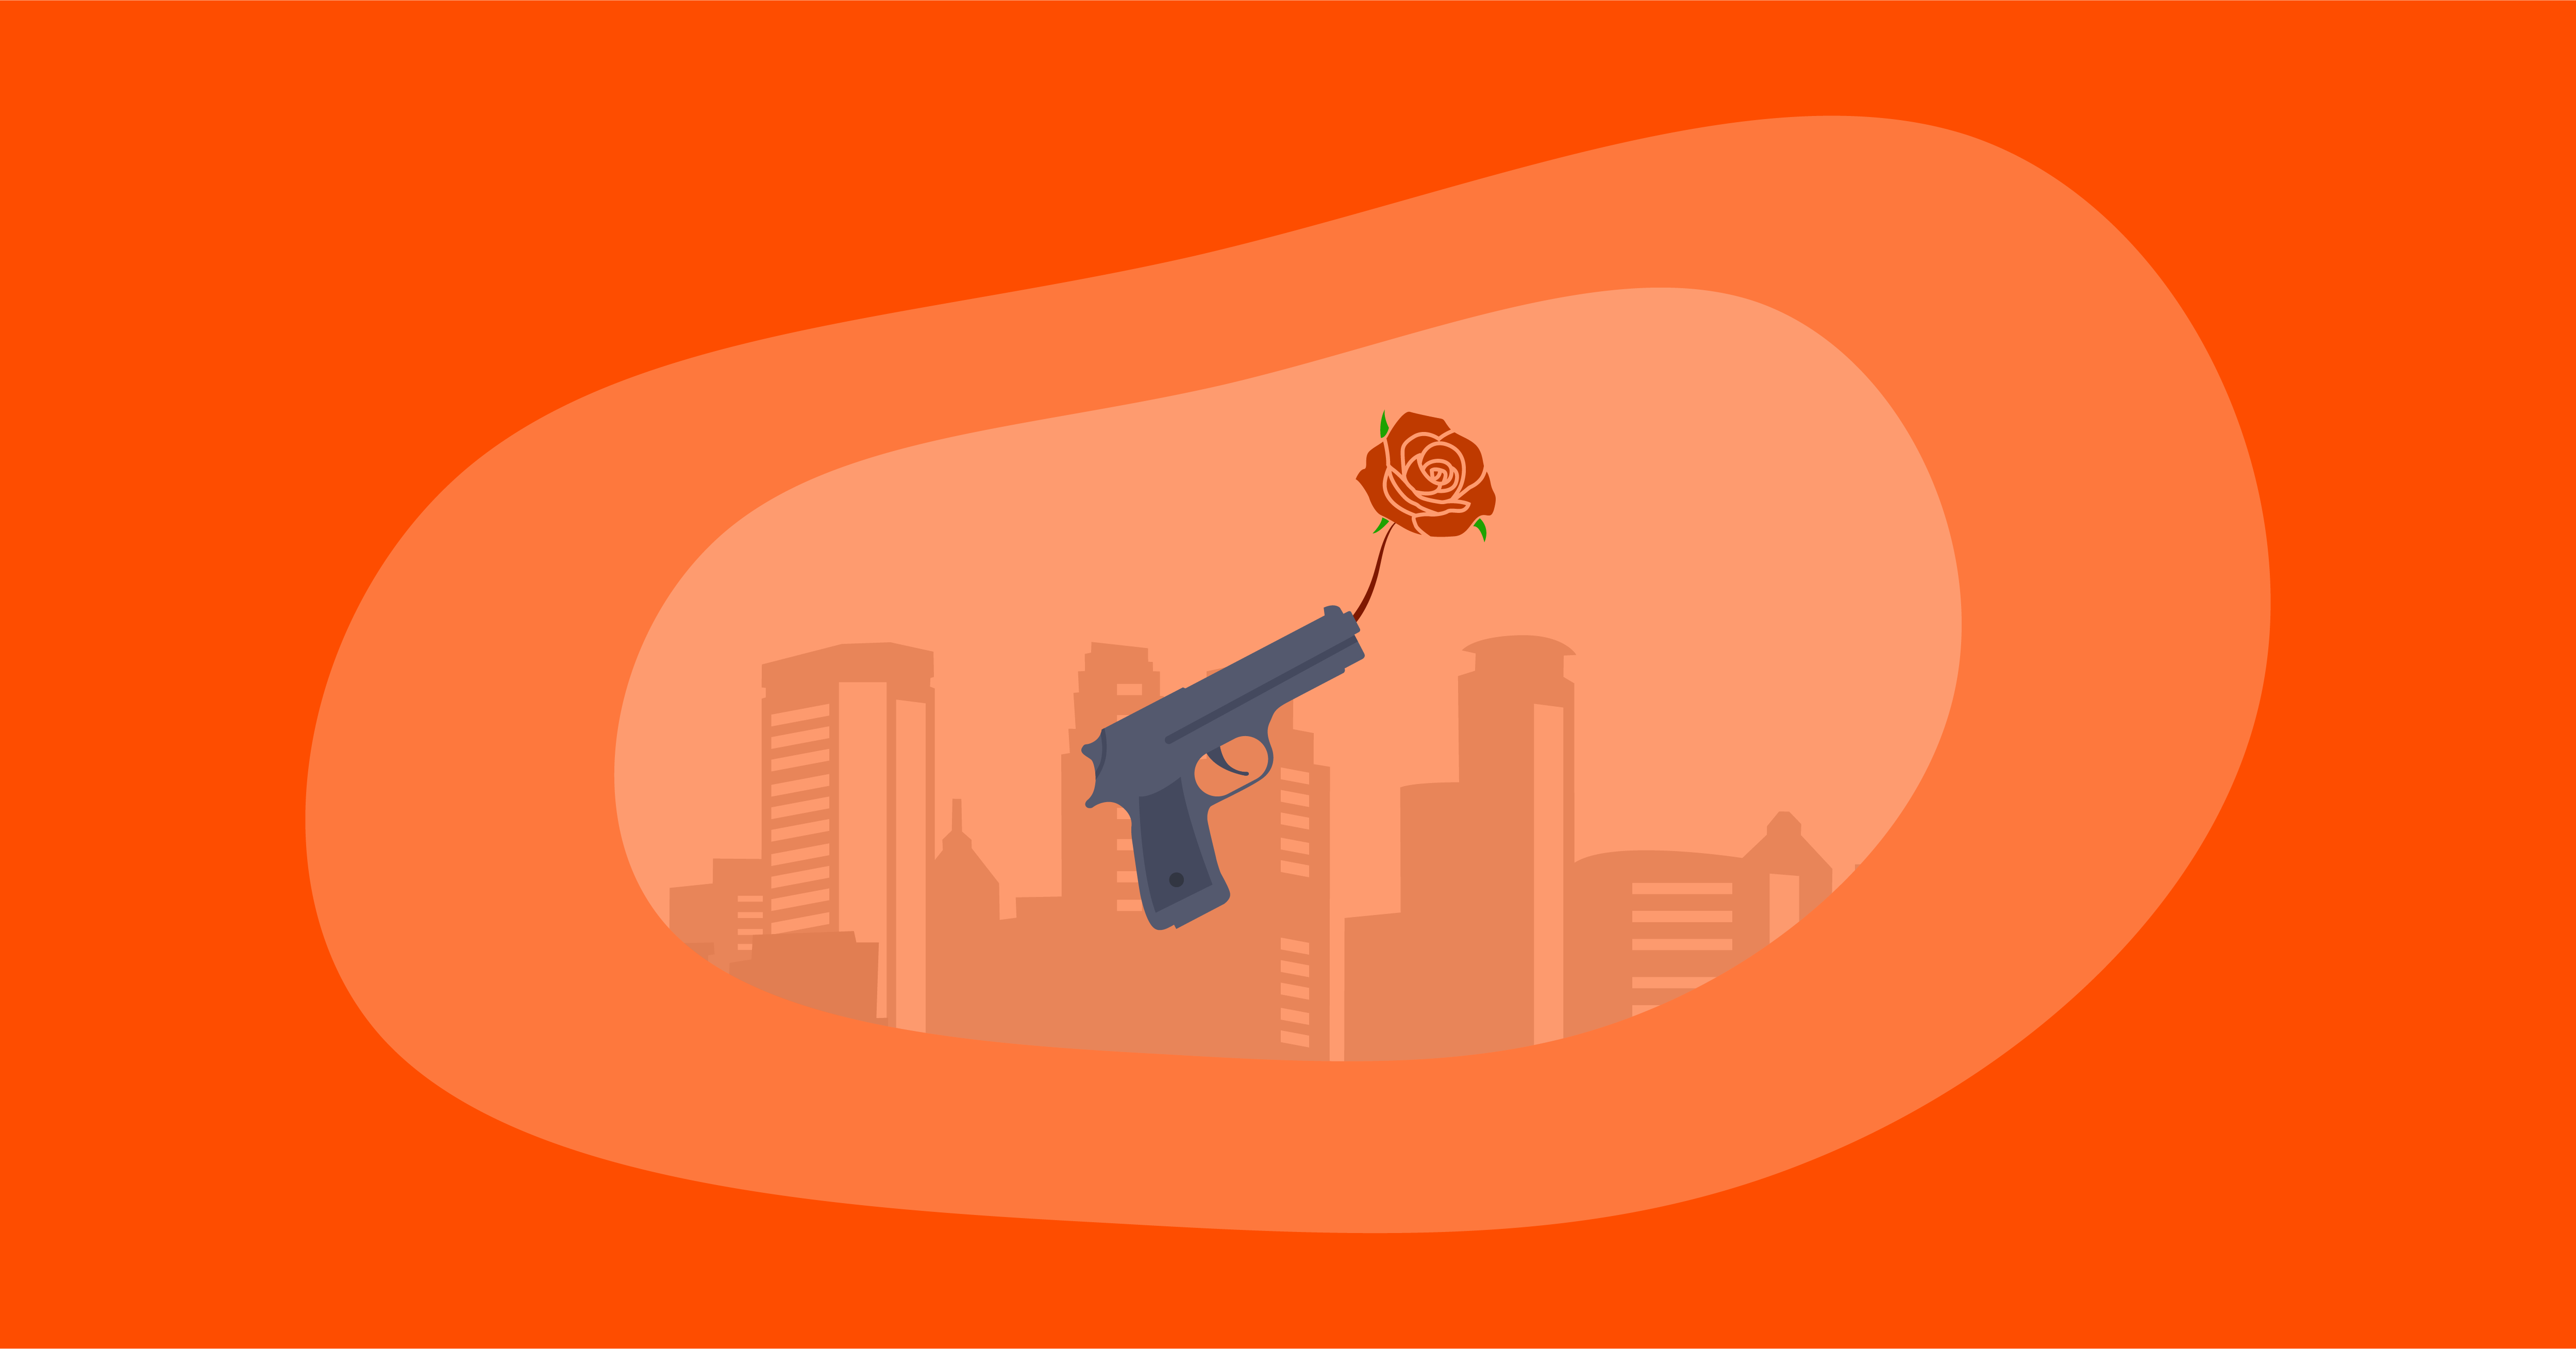 Illustration of a gun and a rose